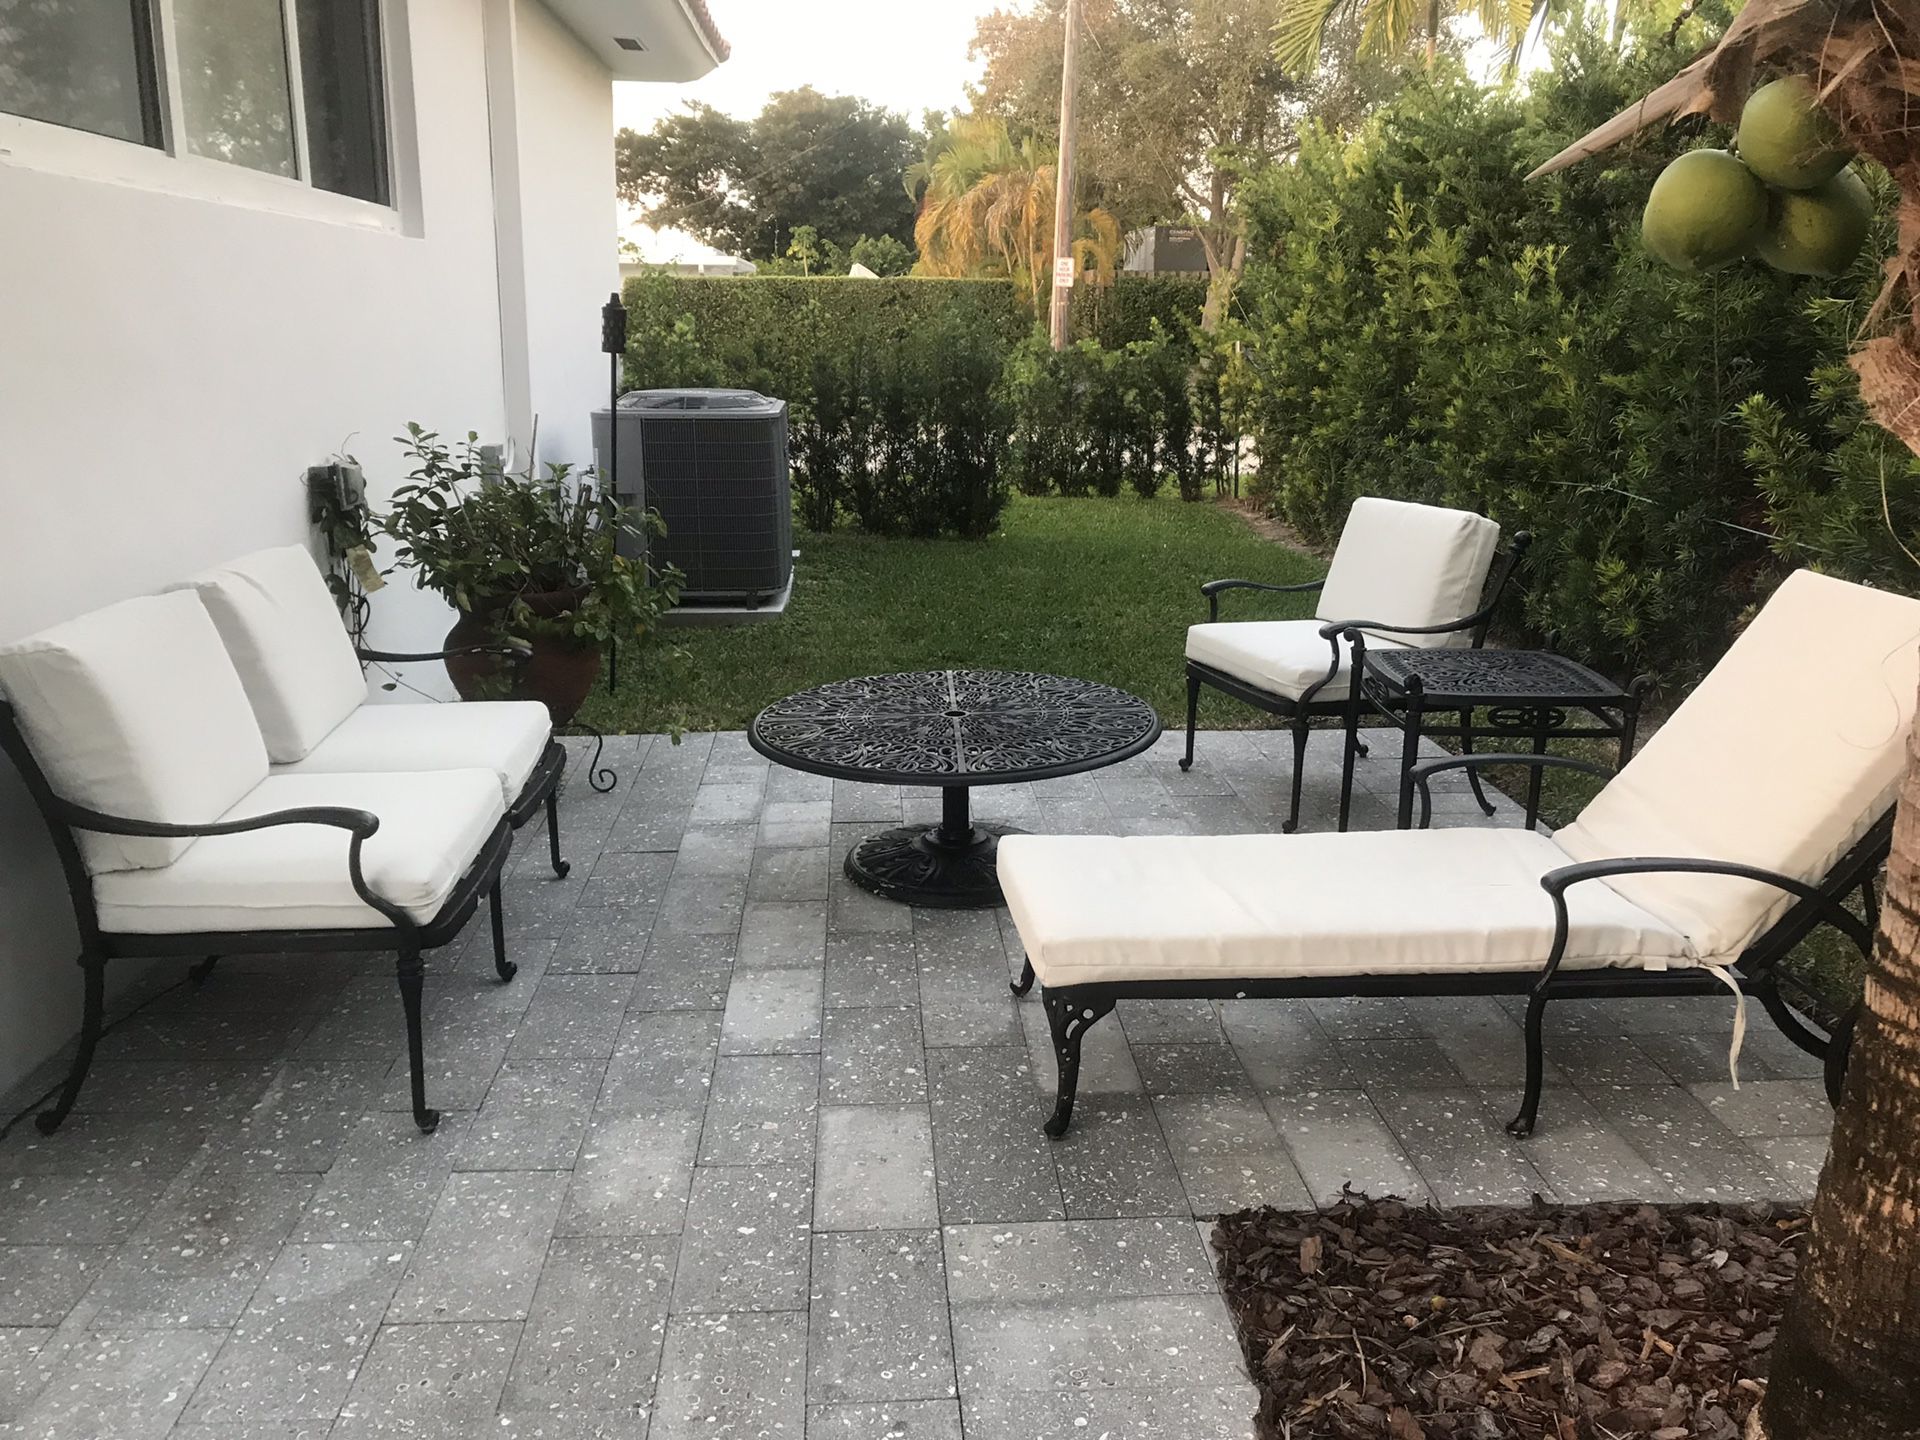 Iron outdoor 5 piece patio furniture with cushions